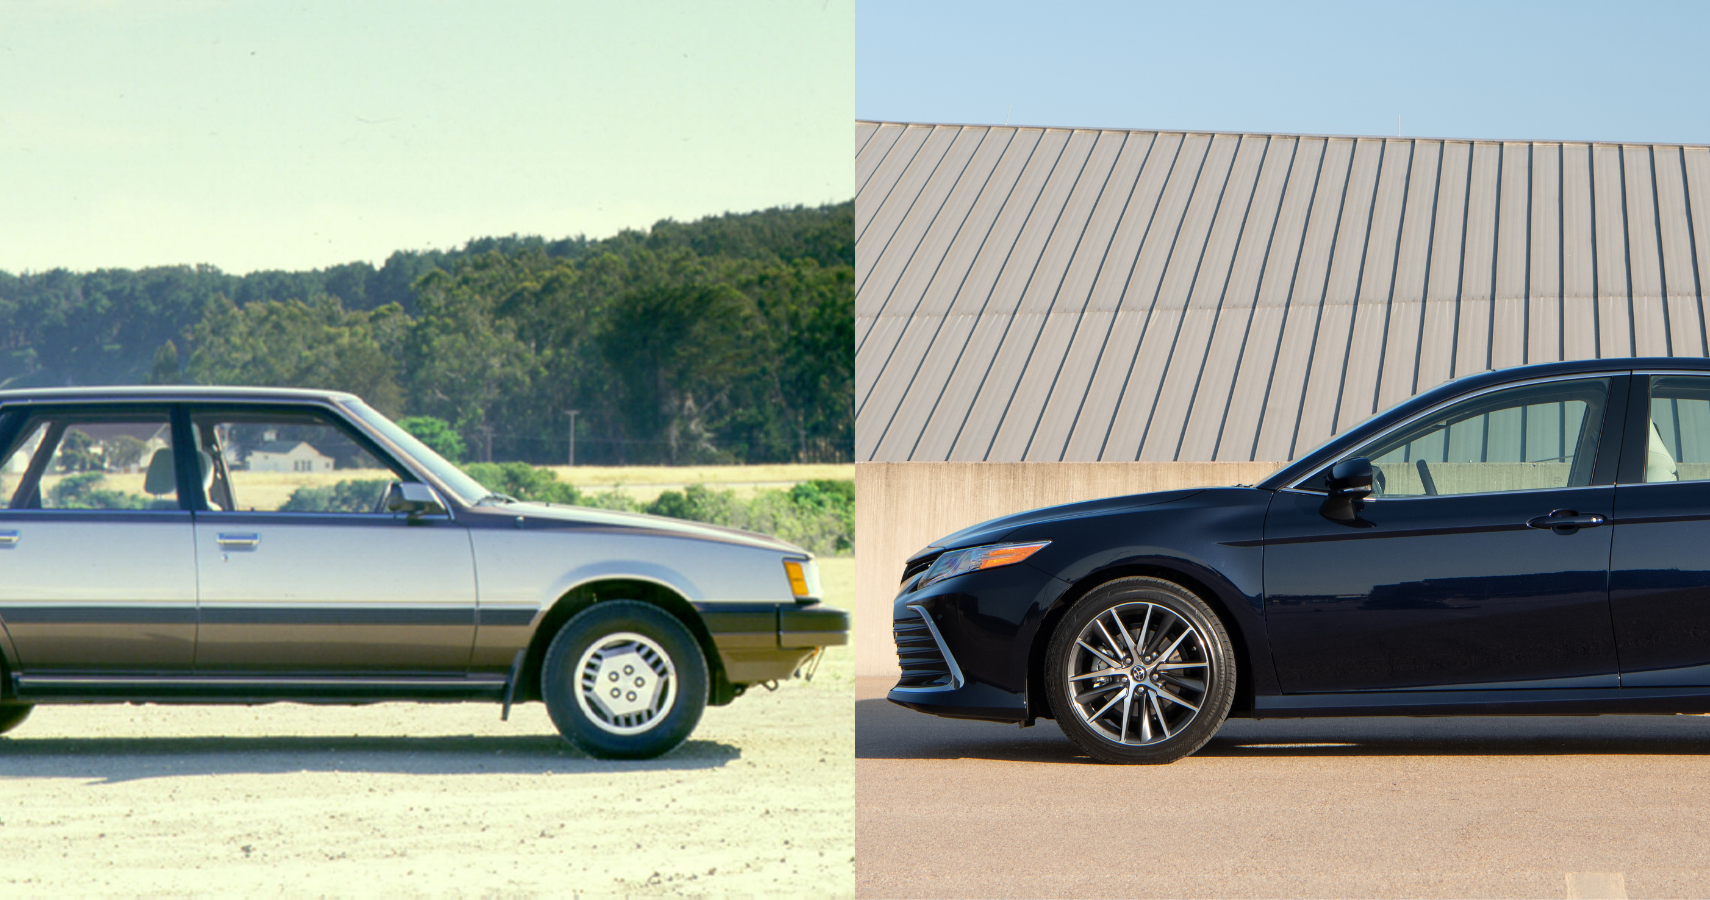 Toyota Camry 1st gen vs 8th gen 40 years apart side view